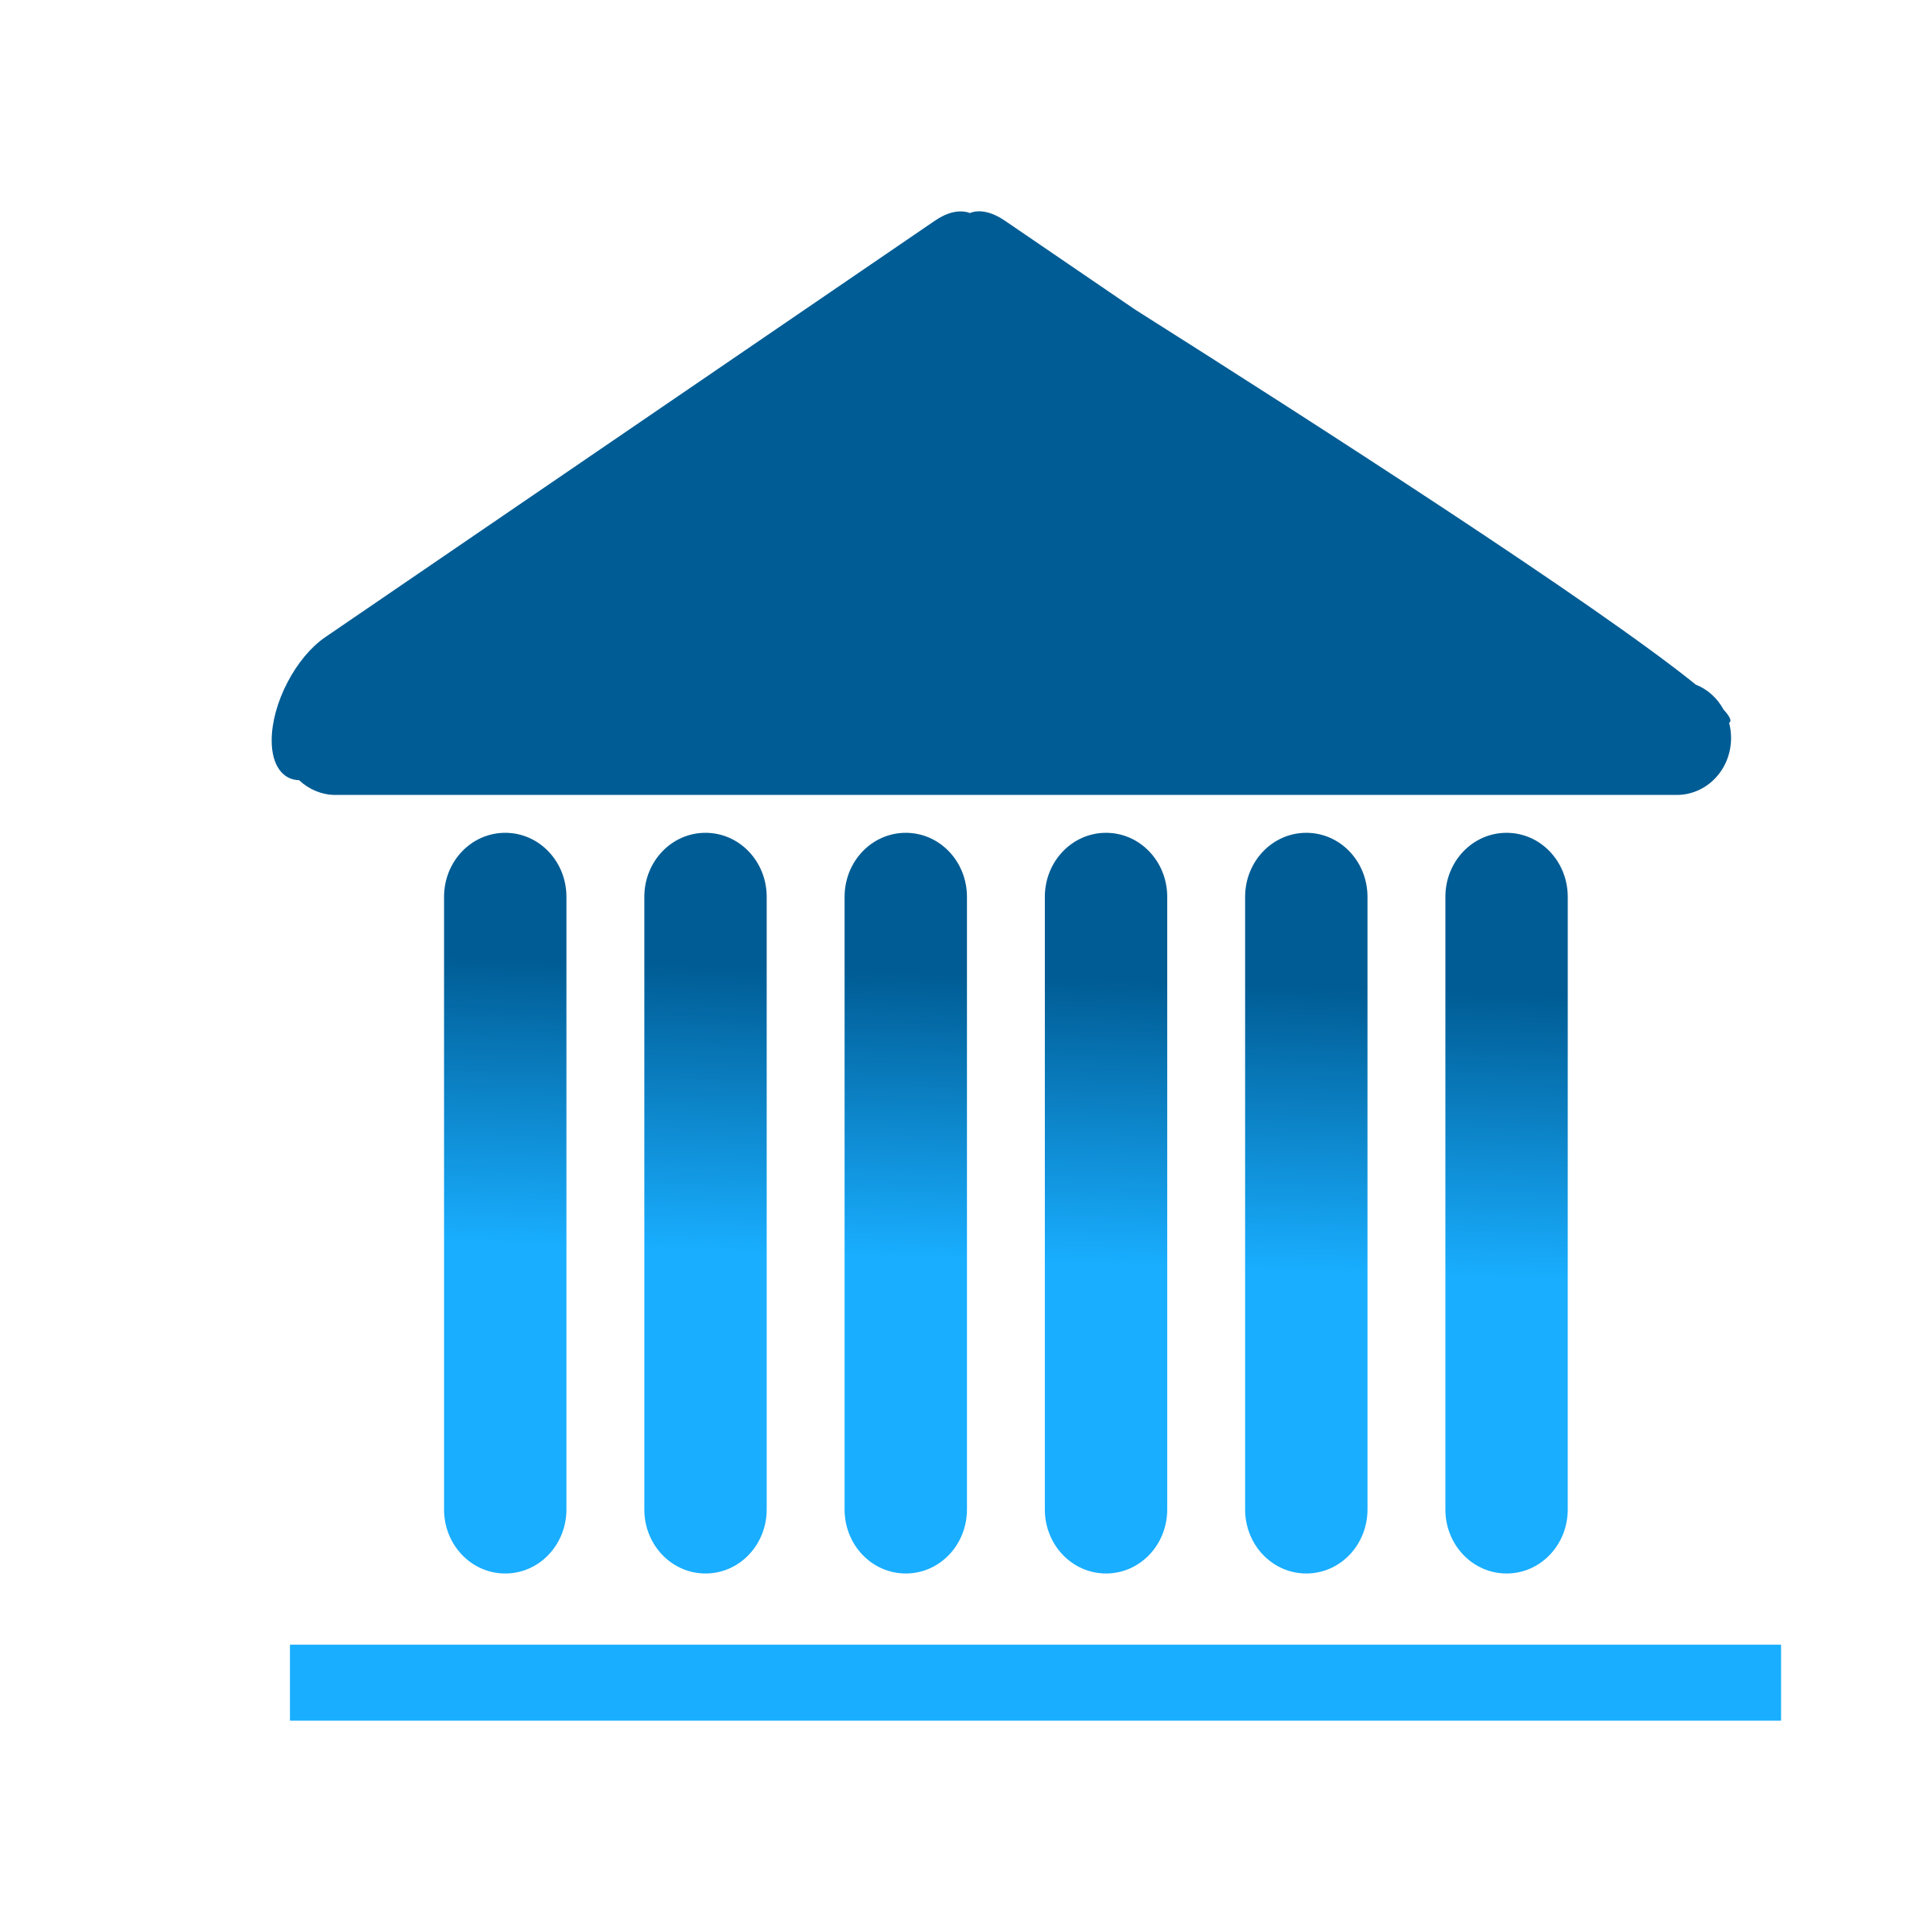 Courthouse clipart institutional. Institution icon